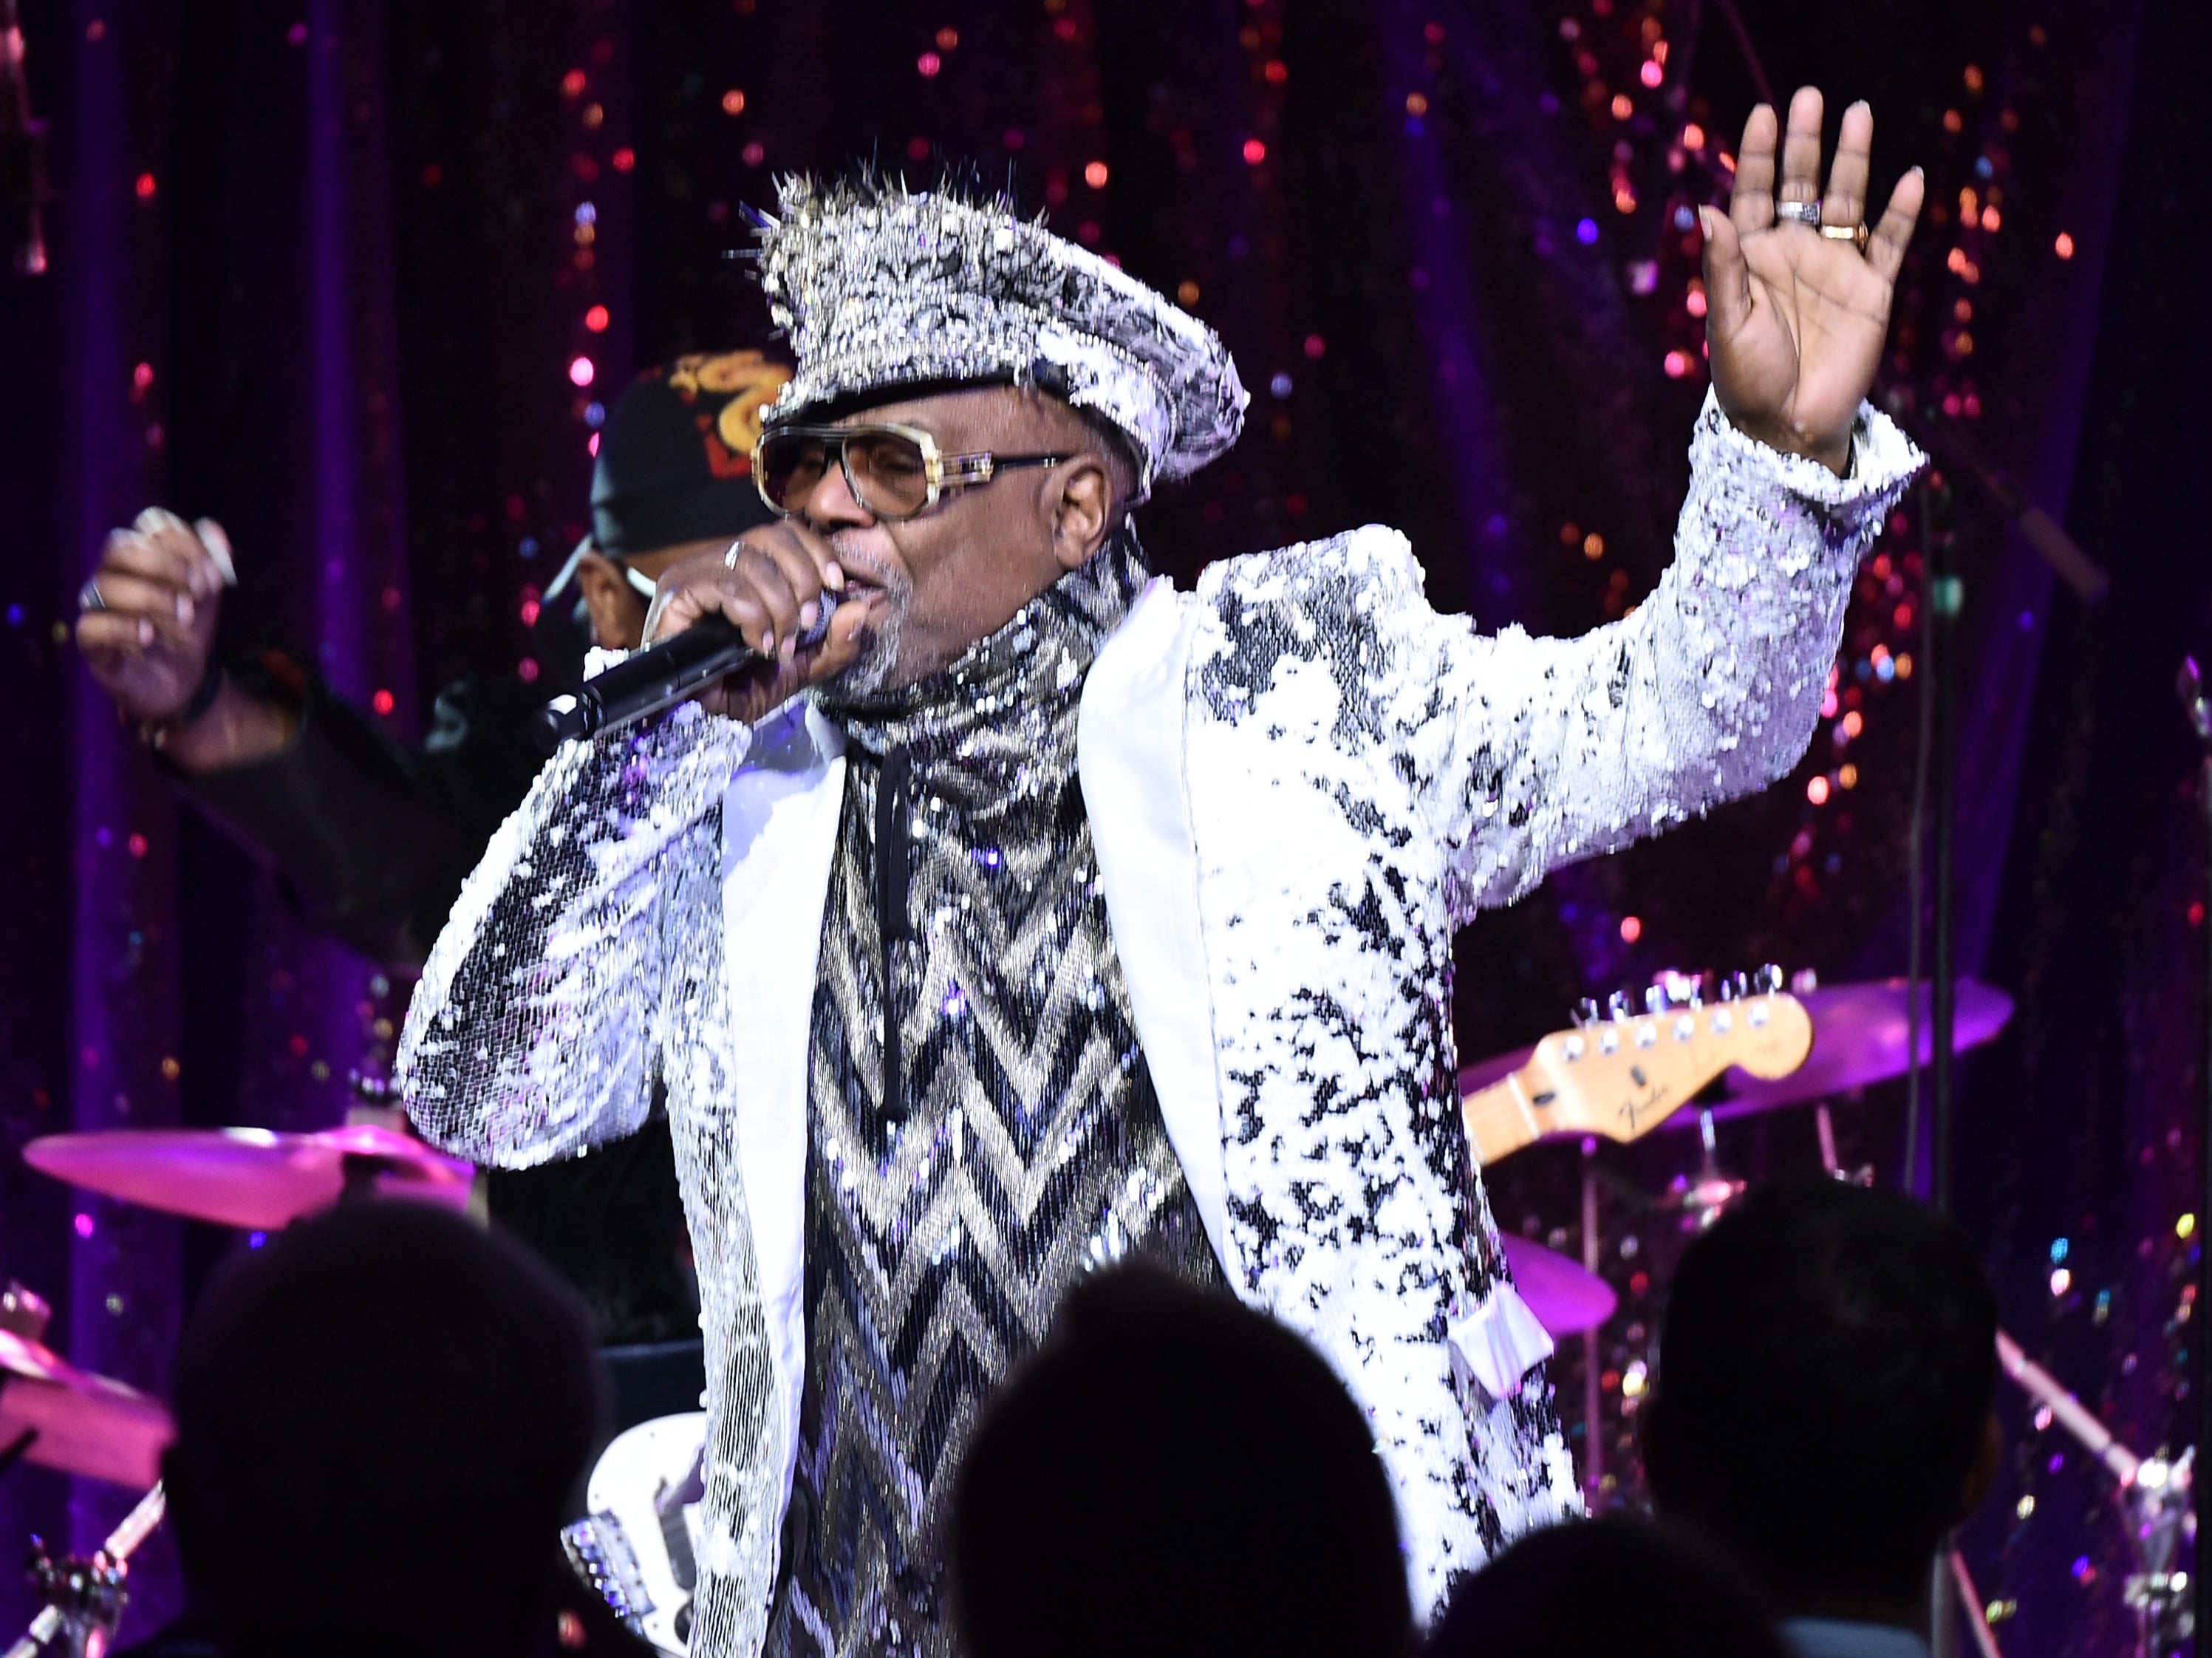 George Clinton performing in New York in 2017